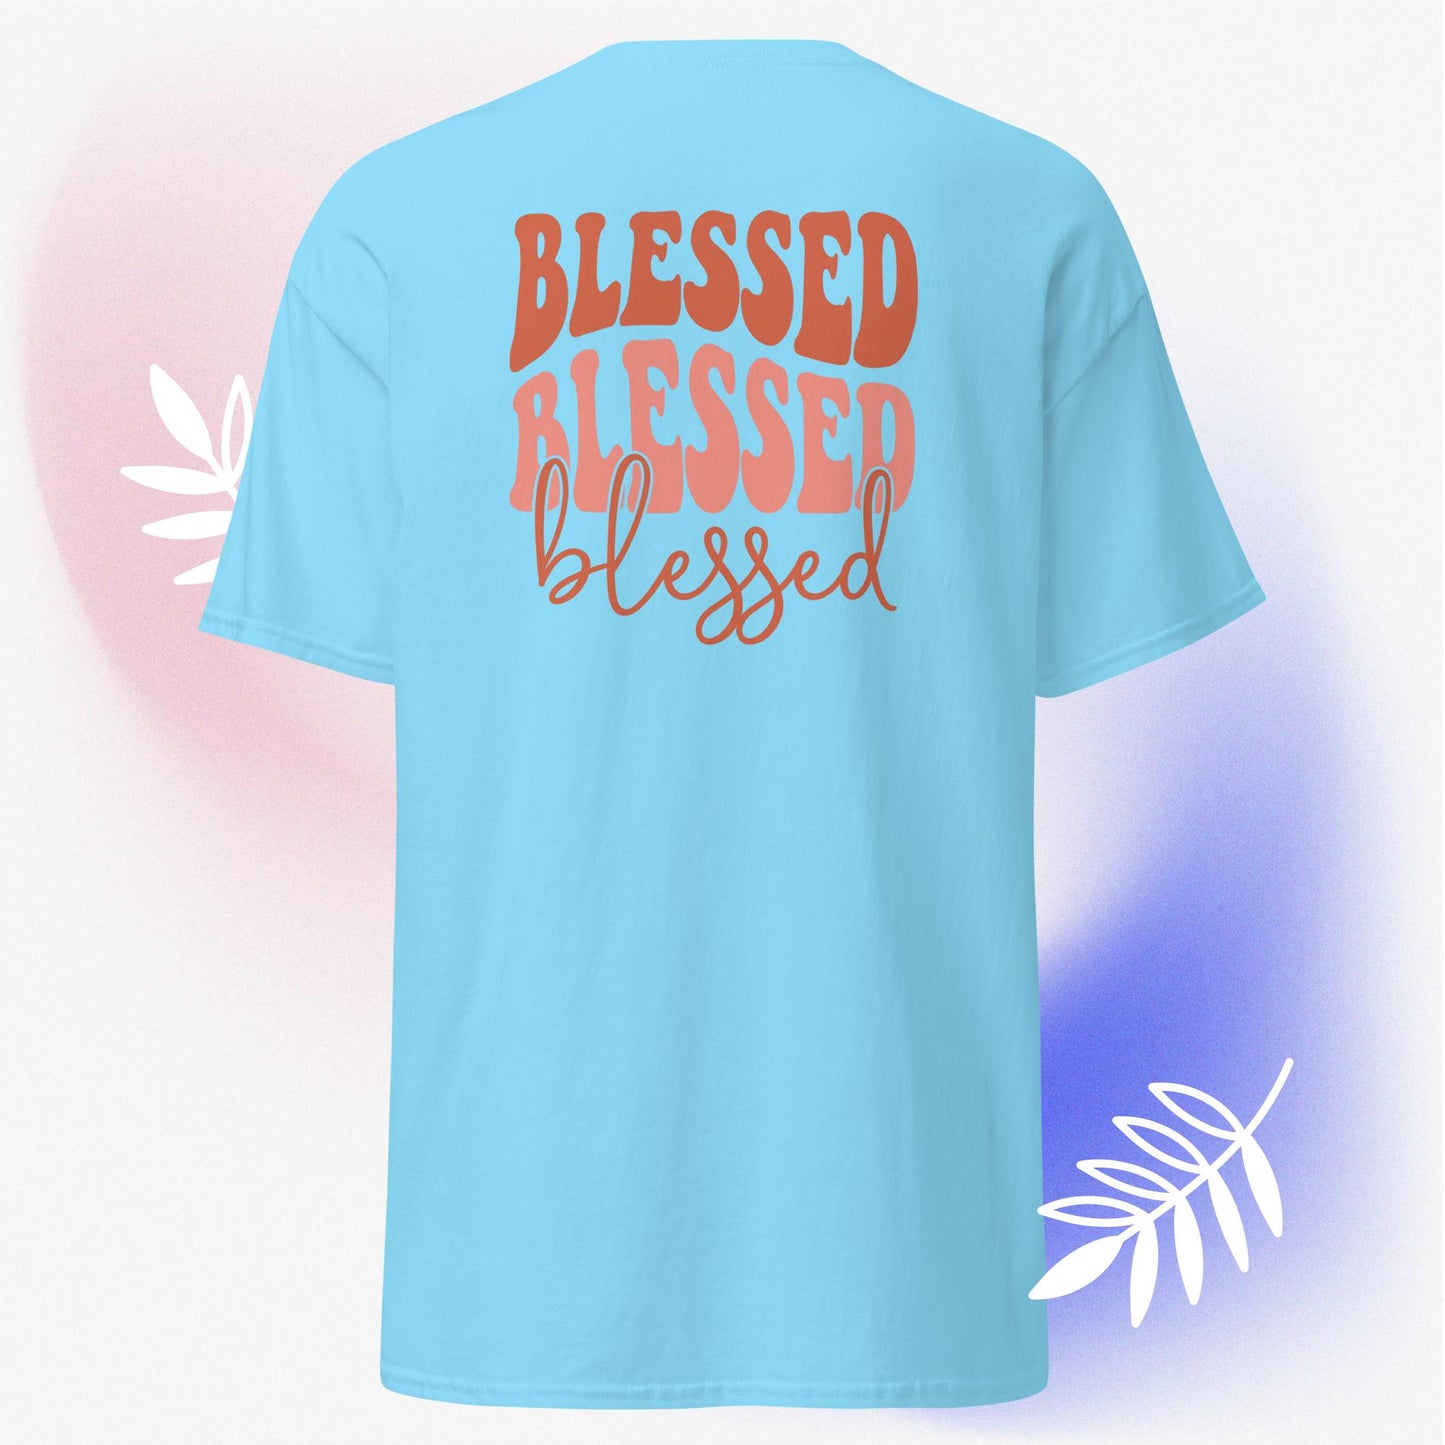 Blessed classic tee